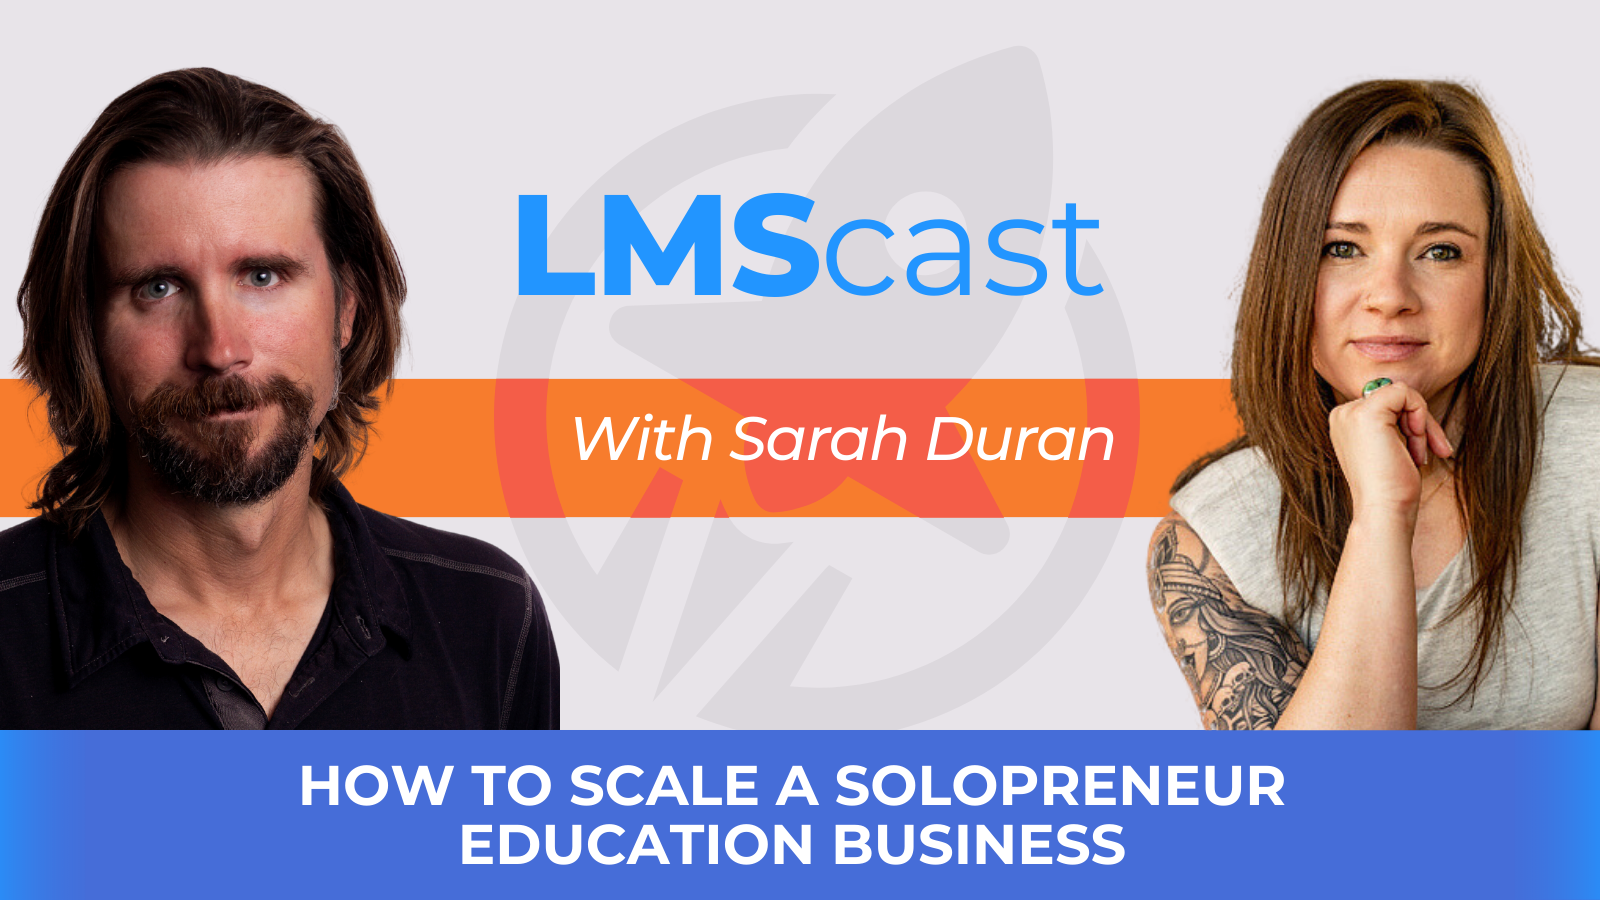 How to Scale a Solopreneur Education Business with Sarah Duran